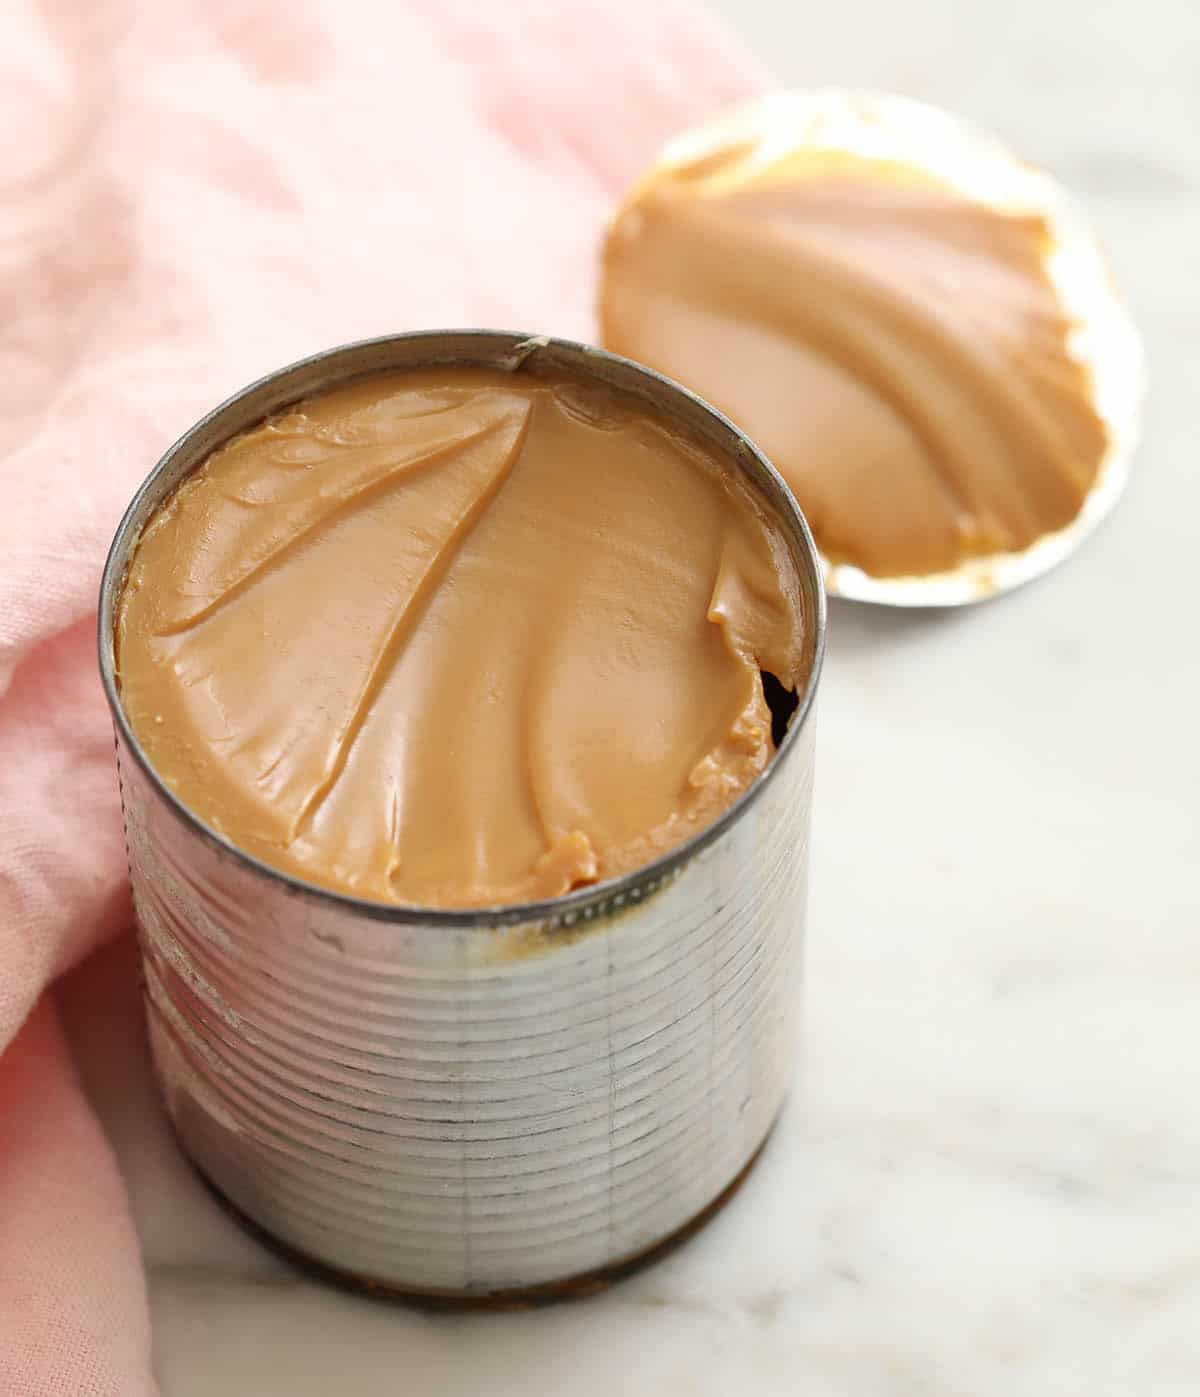 Freshly cooked dulce de leche in a can.